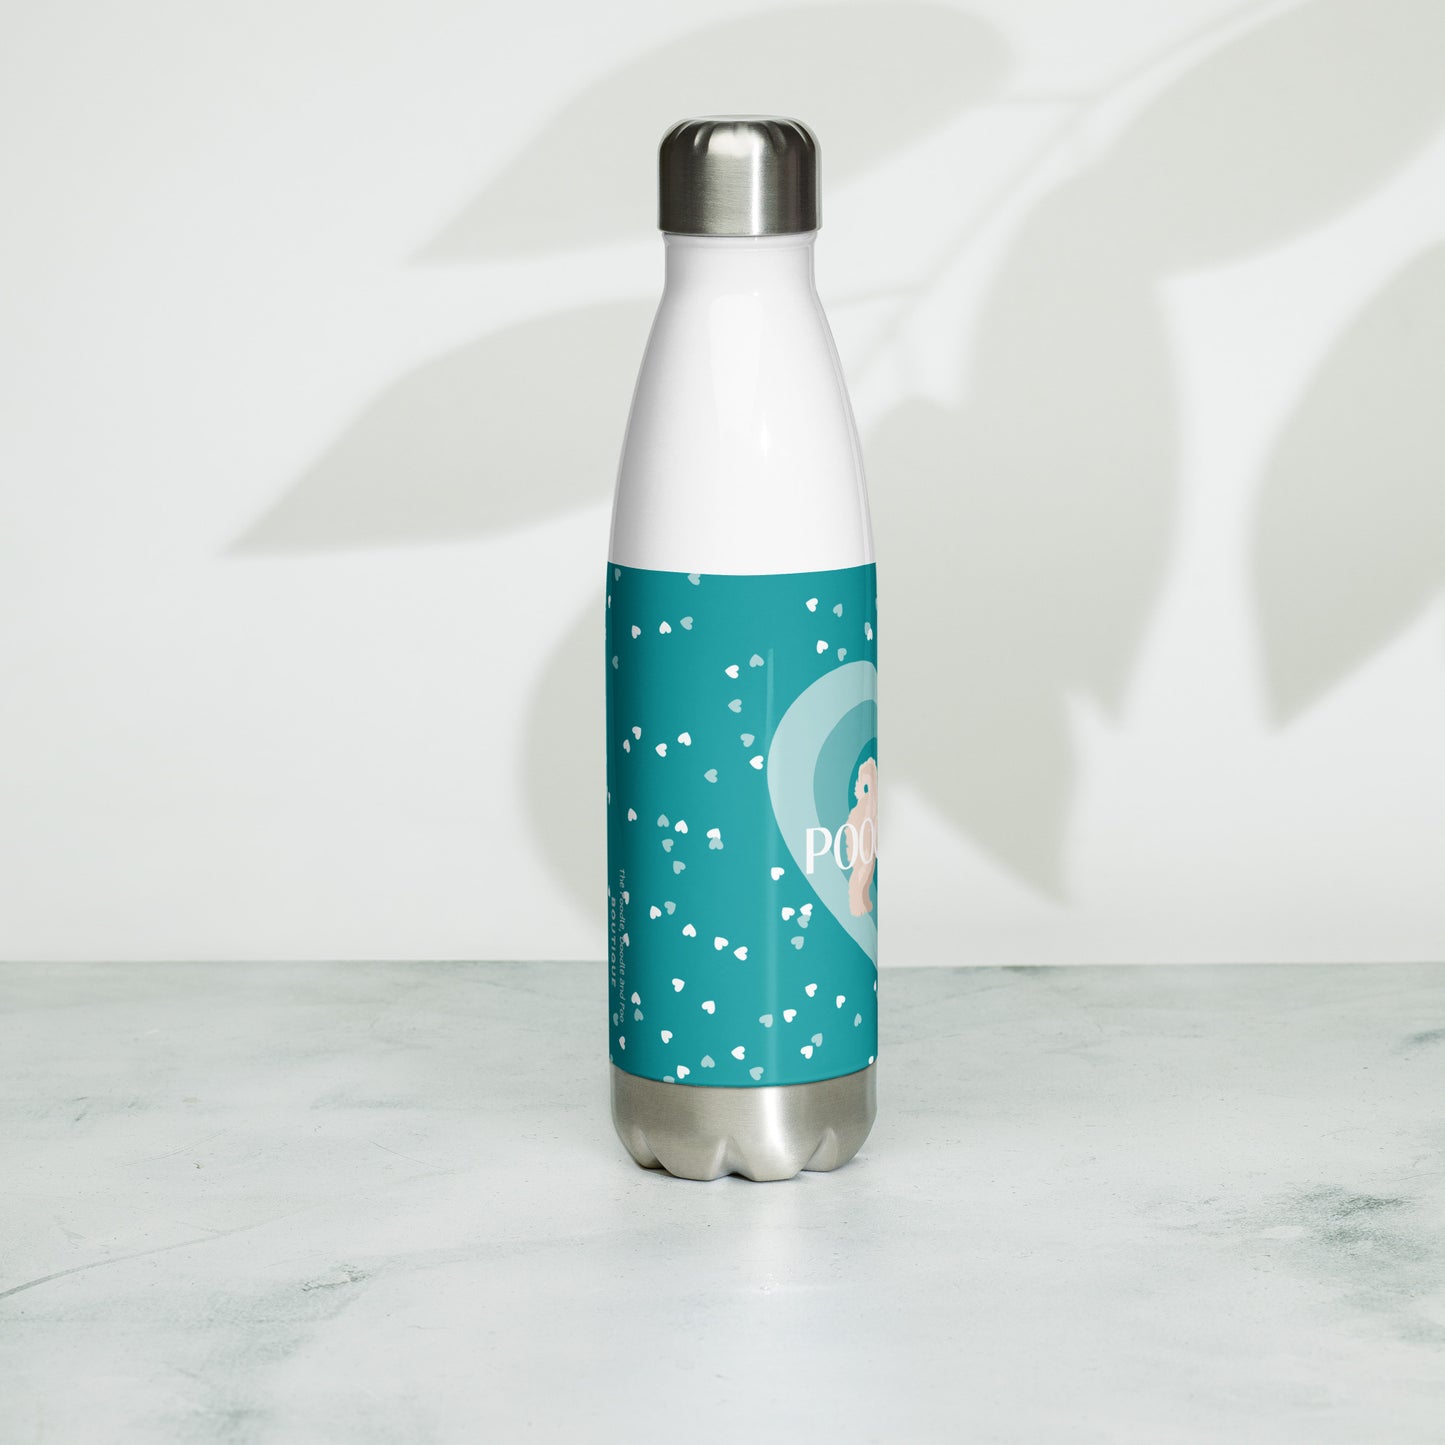 "Love" Stainless steel water bottle in teal - light / white Poochon